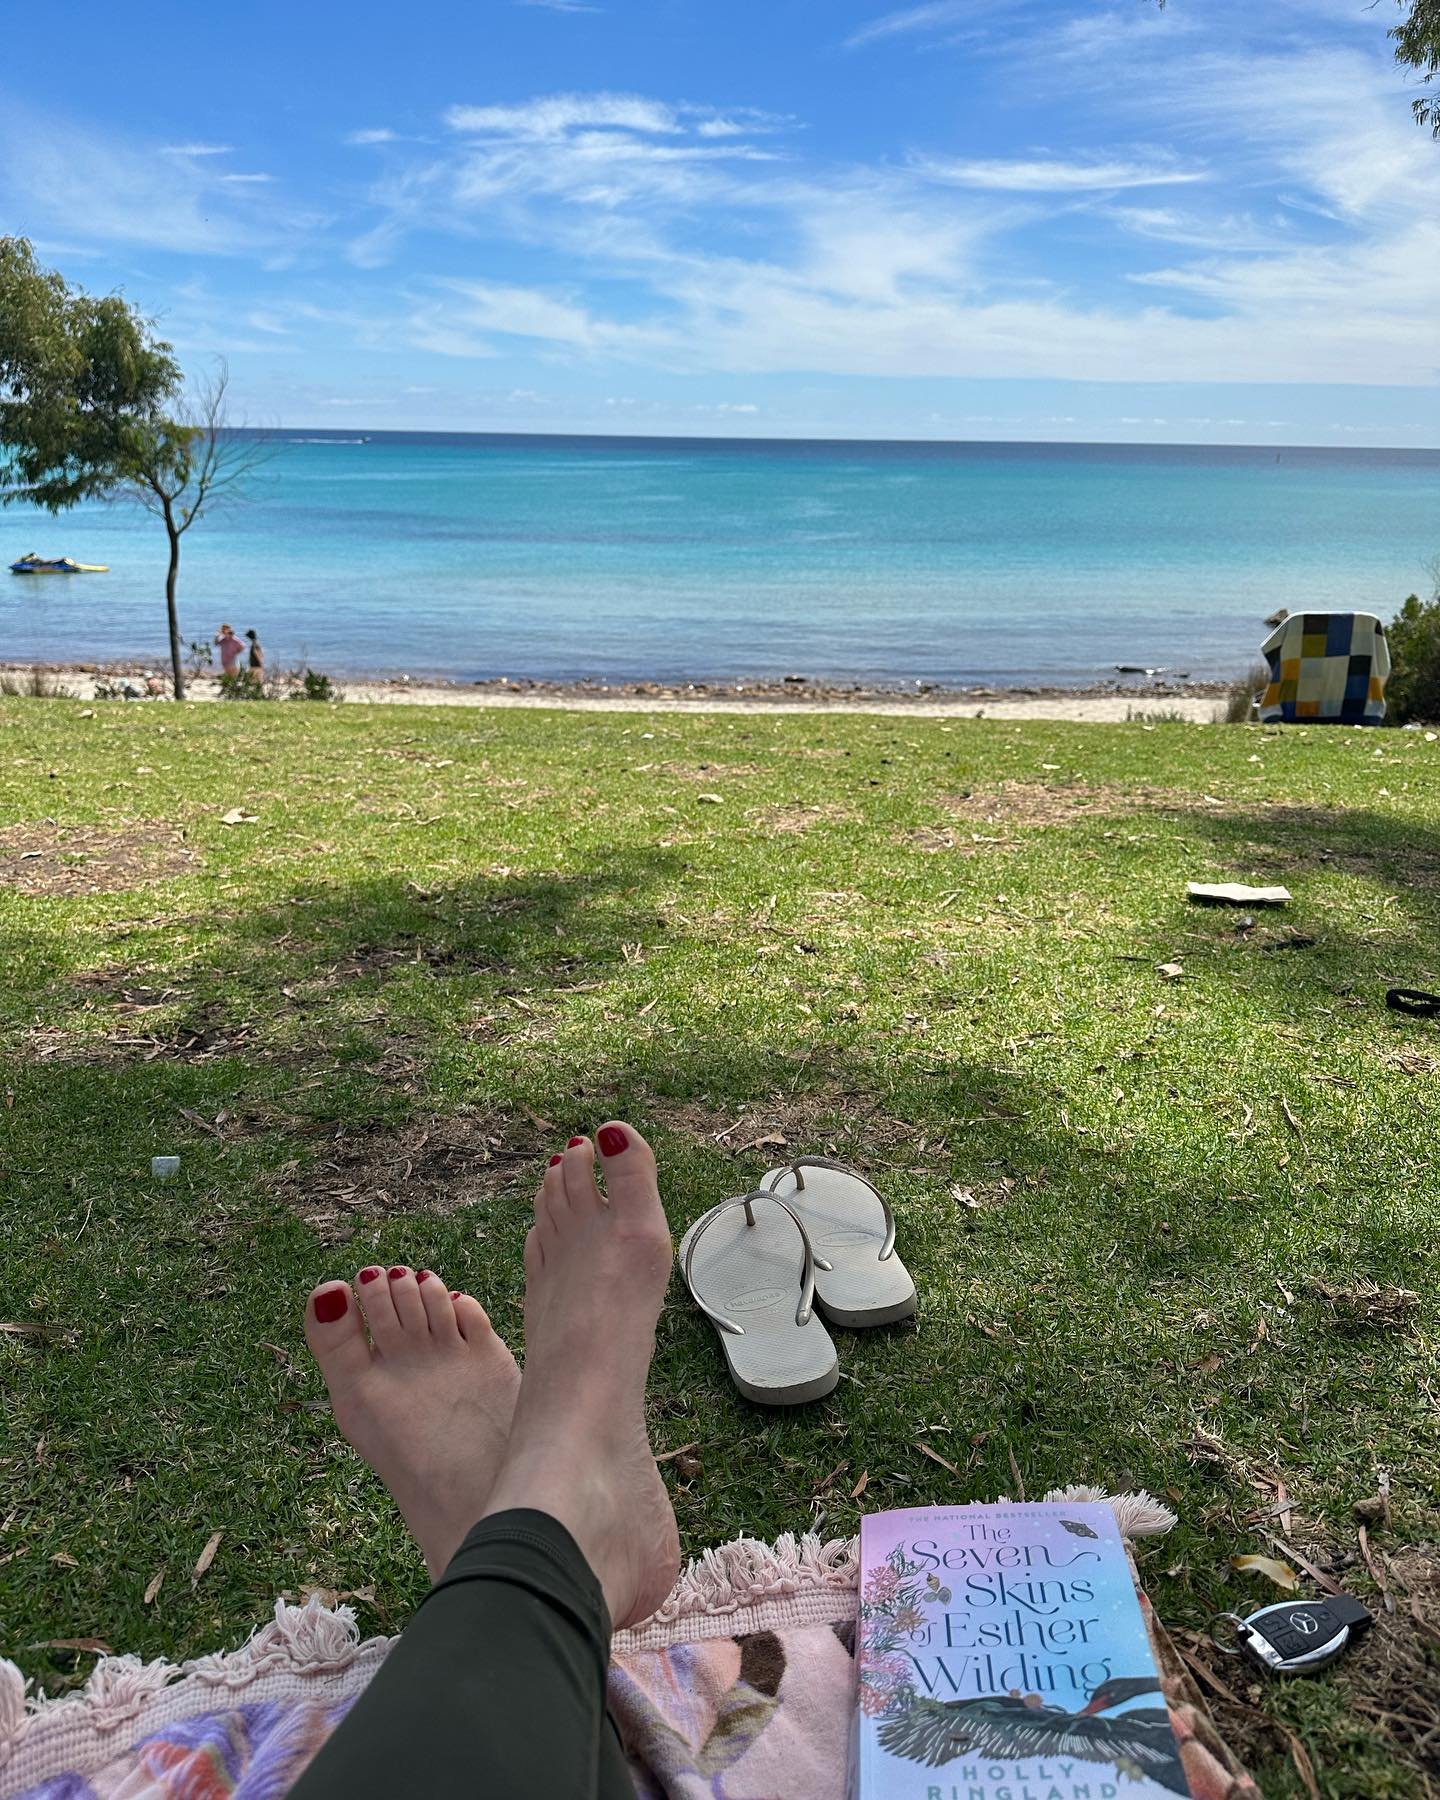 Solo nature time today 💜

Scored a big shady spot on the grass, with this incredible aqua view and lazed with a good book given to me by my gorgeous friend Caroline @dunsboroughballet (thank you so loving it!) 

Just me, a book, this view, and a tre